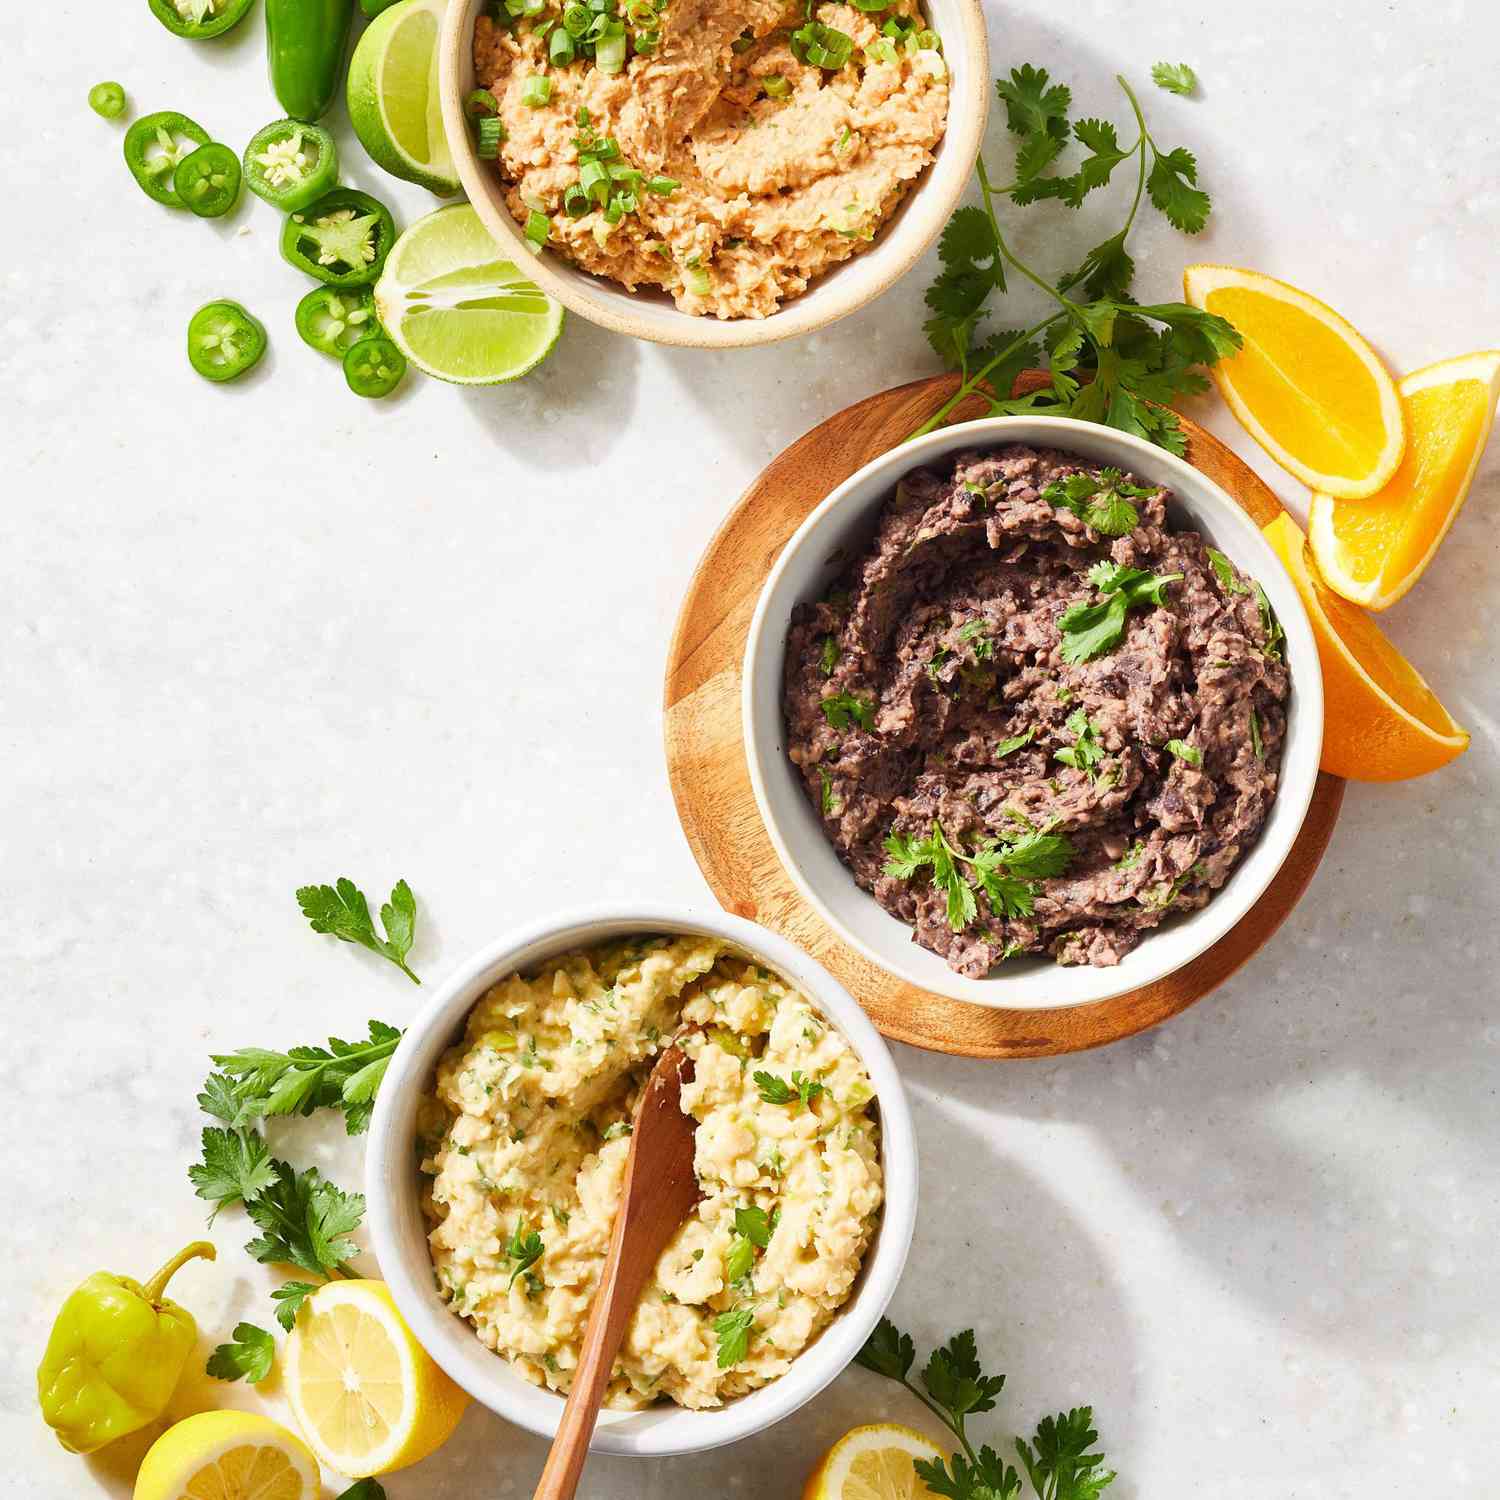 Three bowls of different bean dips